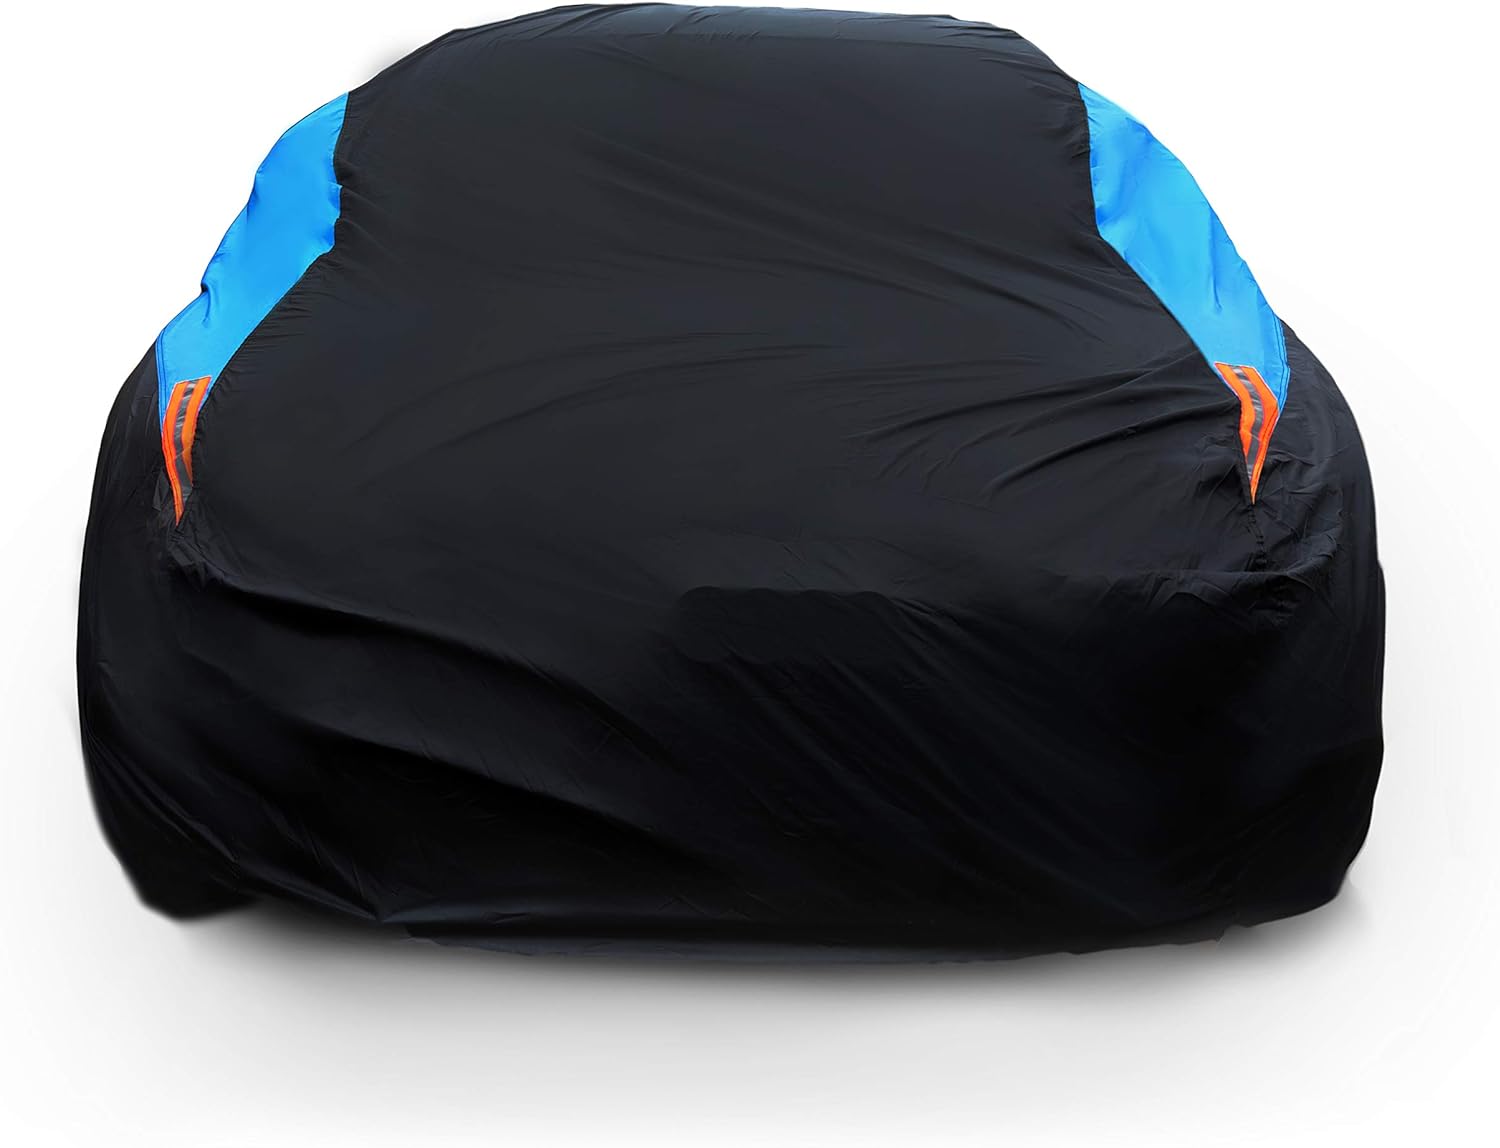 Waterproof Car Cover All Weather Snowproof UV Protection Windproof Outdoor Full car Cover, Universal Fit for Sedan (Fit Sedan Length 194-206 inch, Blue)